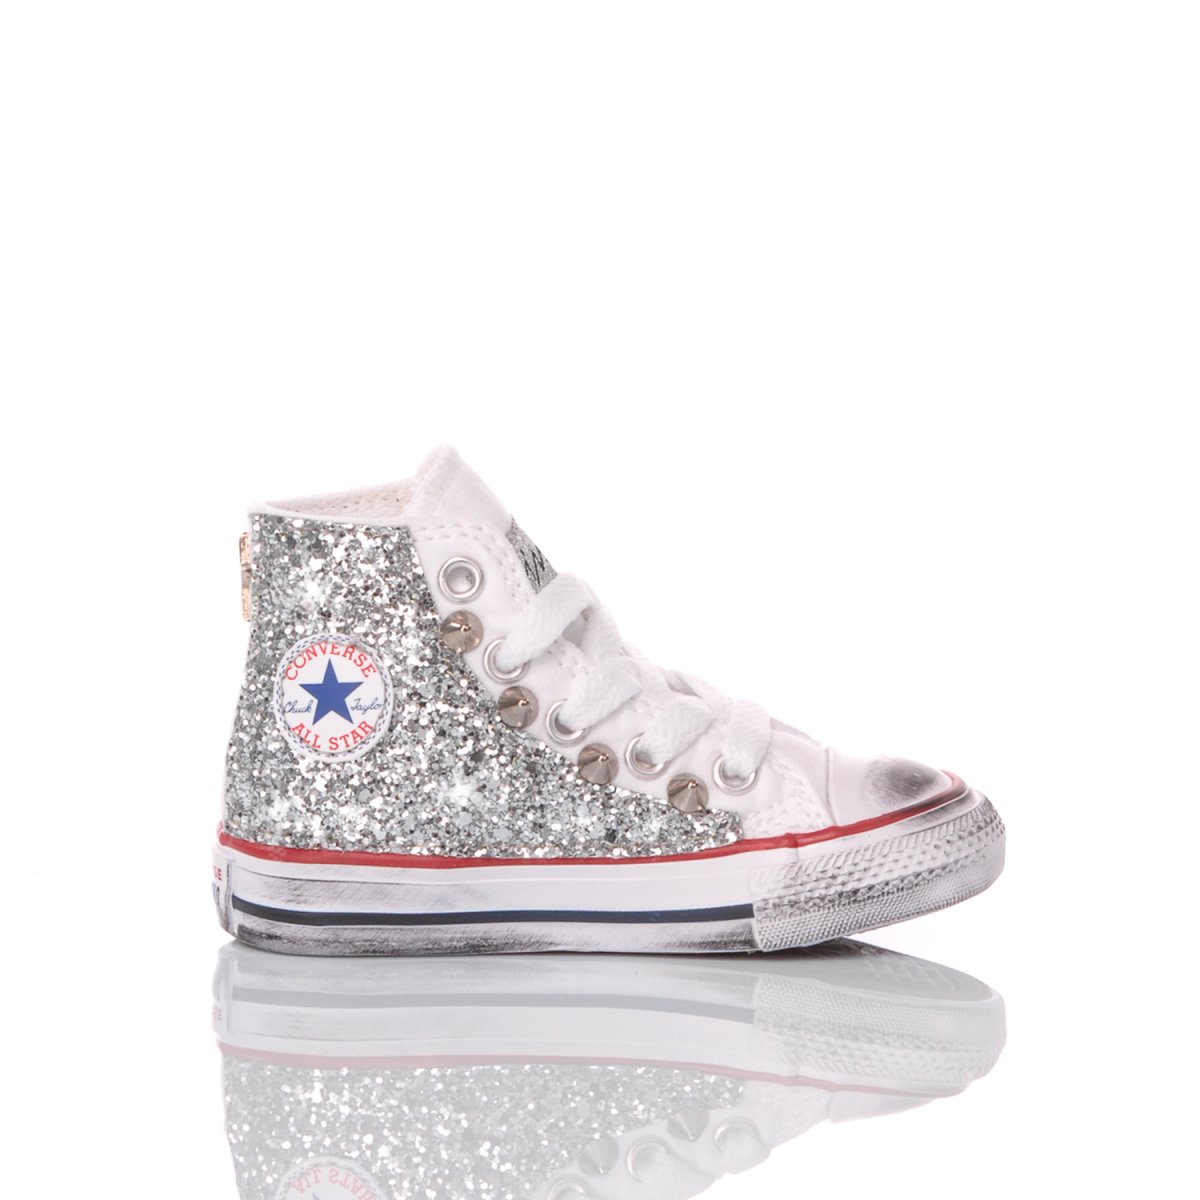 converse bianche argento in inglese